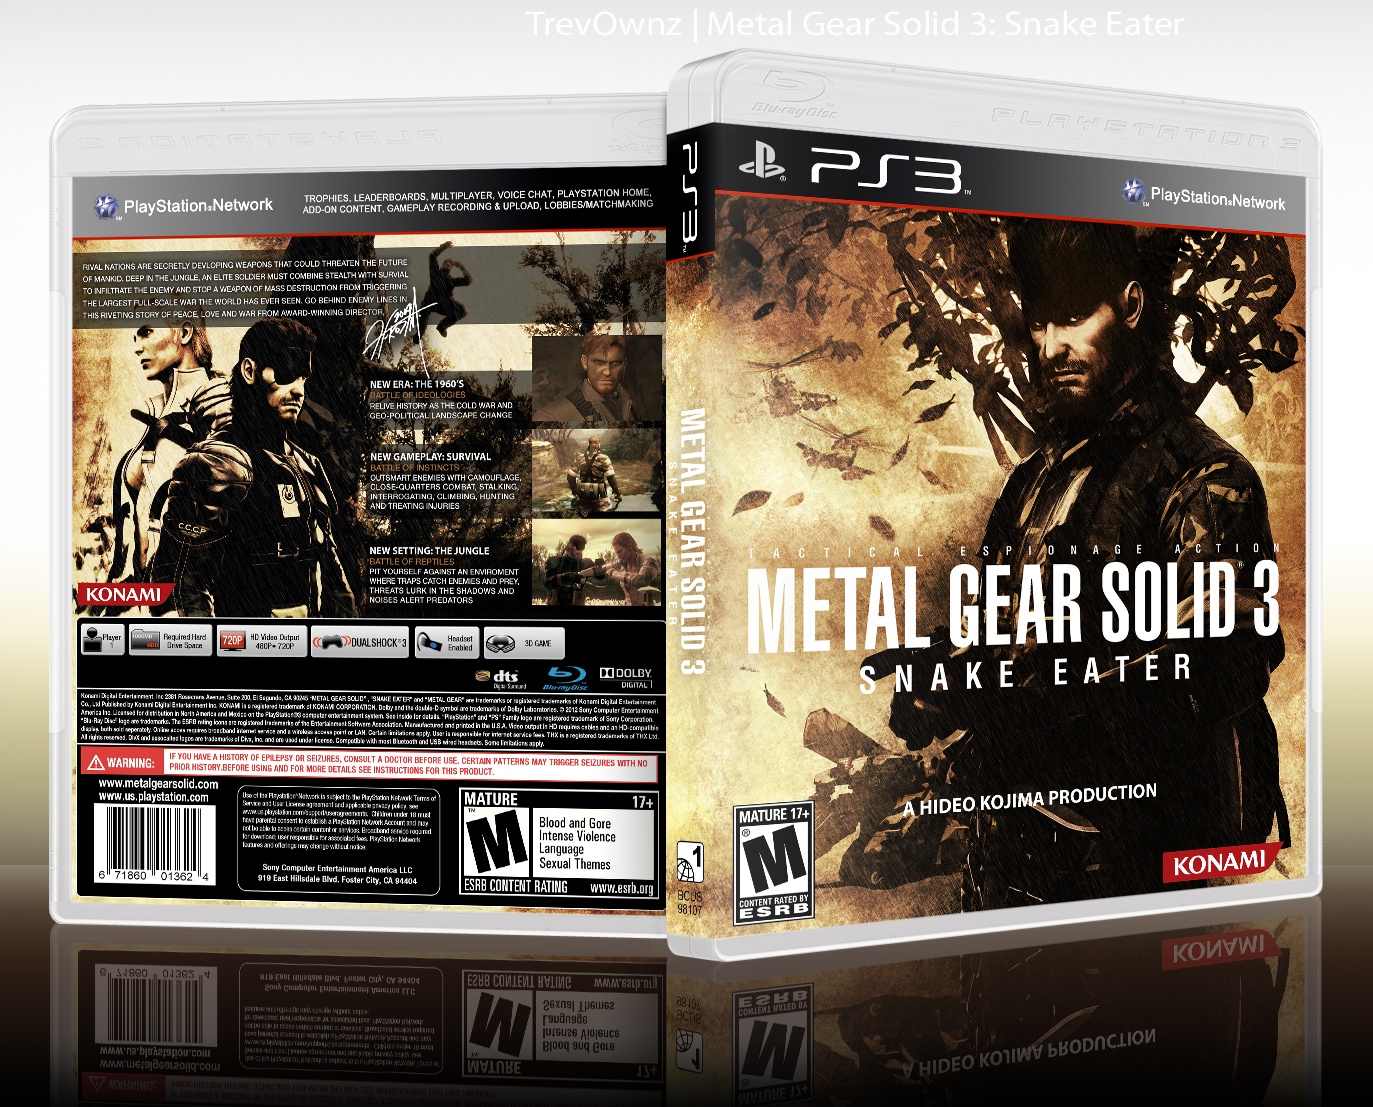 Metal Gear Solid: Snake Eater box cover